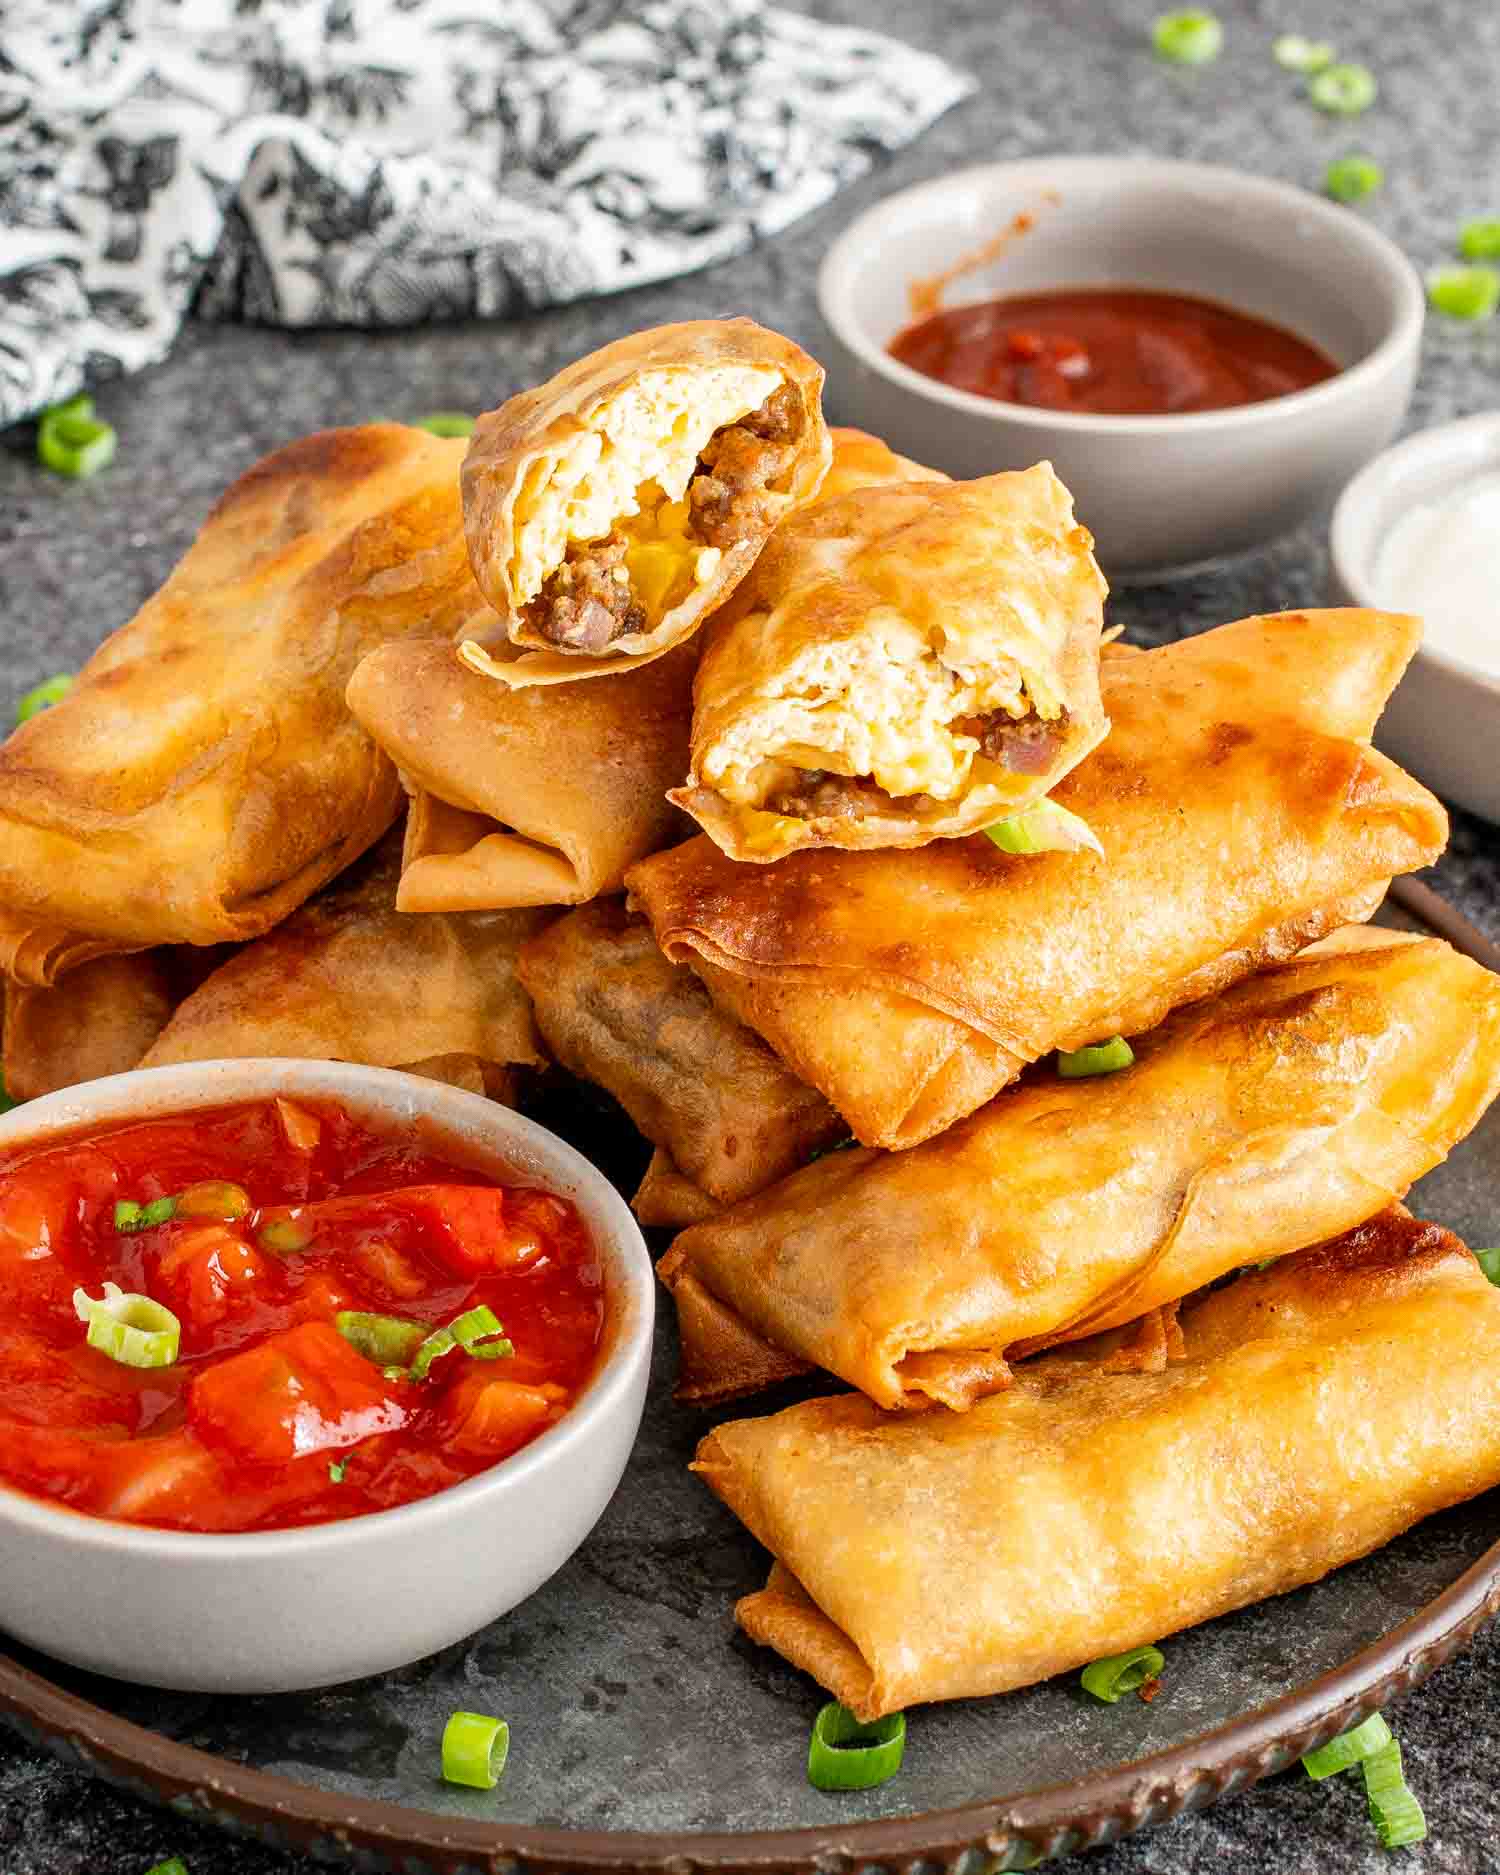 freshly made breakfast egg rolls on a plate along some salsa, ketchup and sour cream.